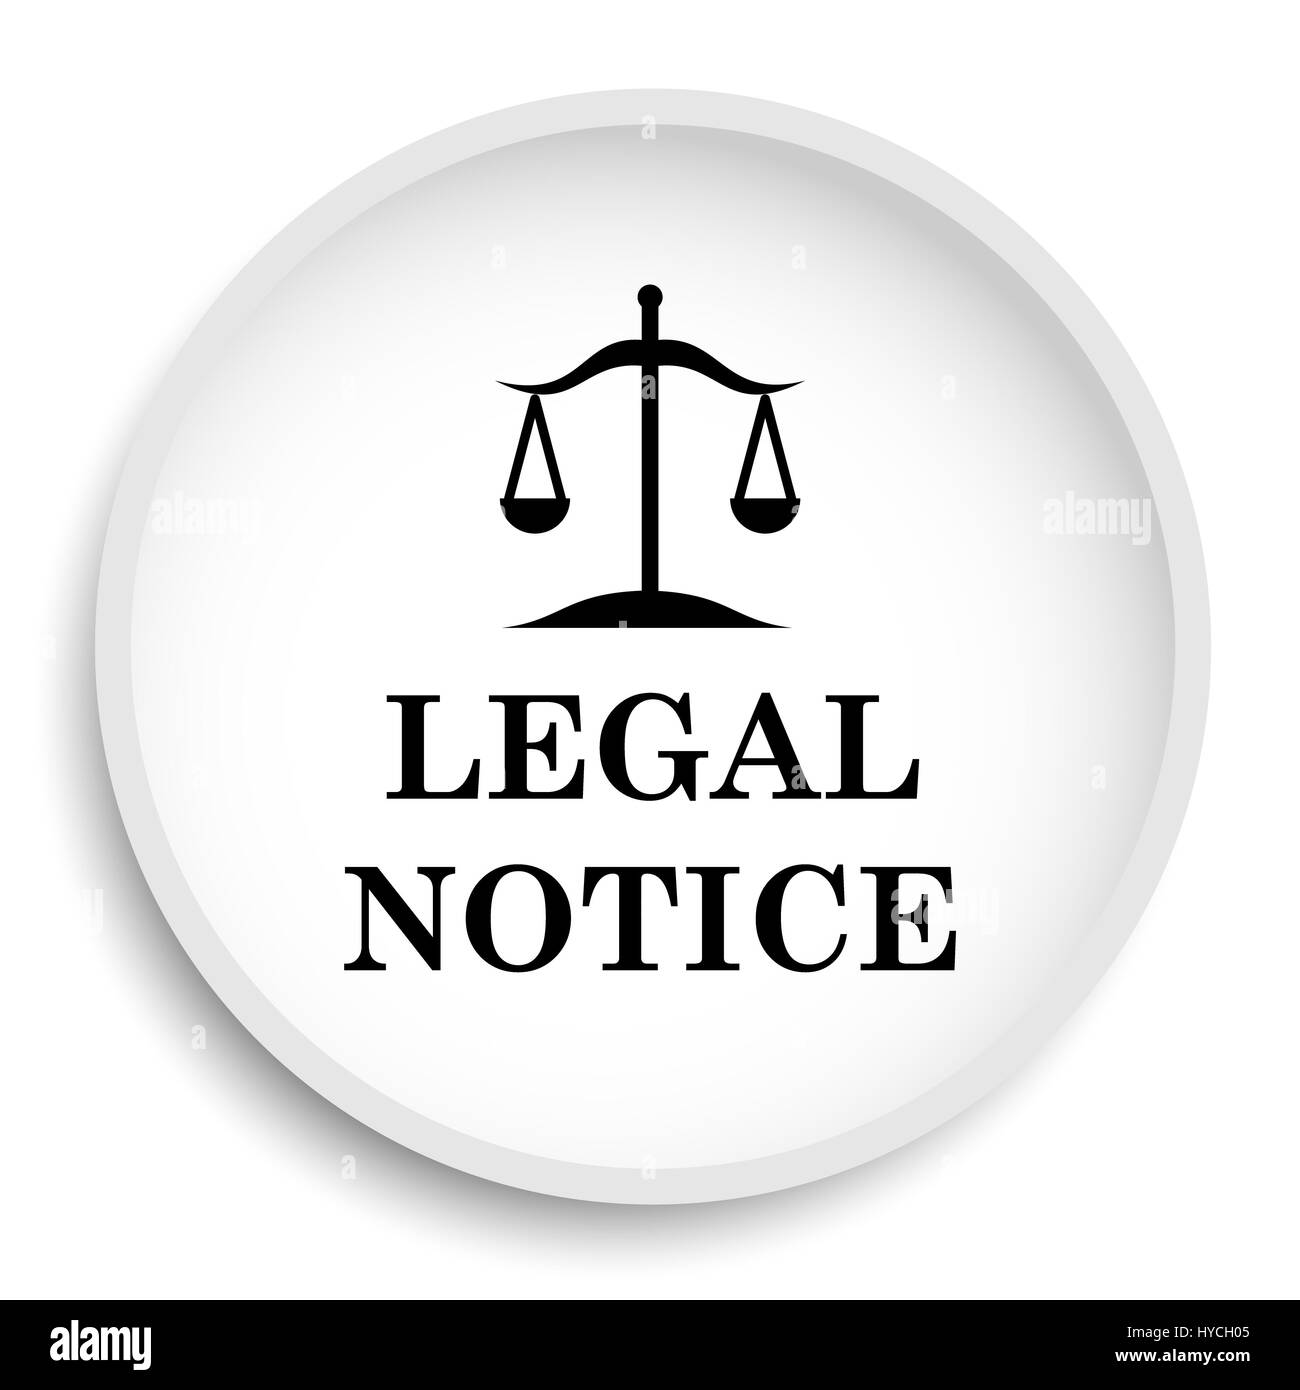 Legal notice icon. Legal notice website button on white background ...